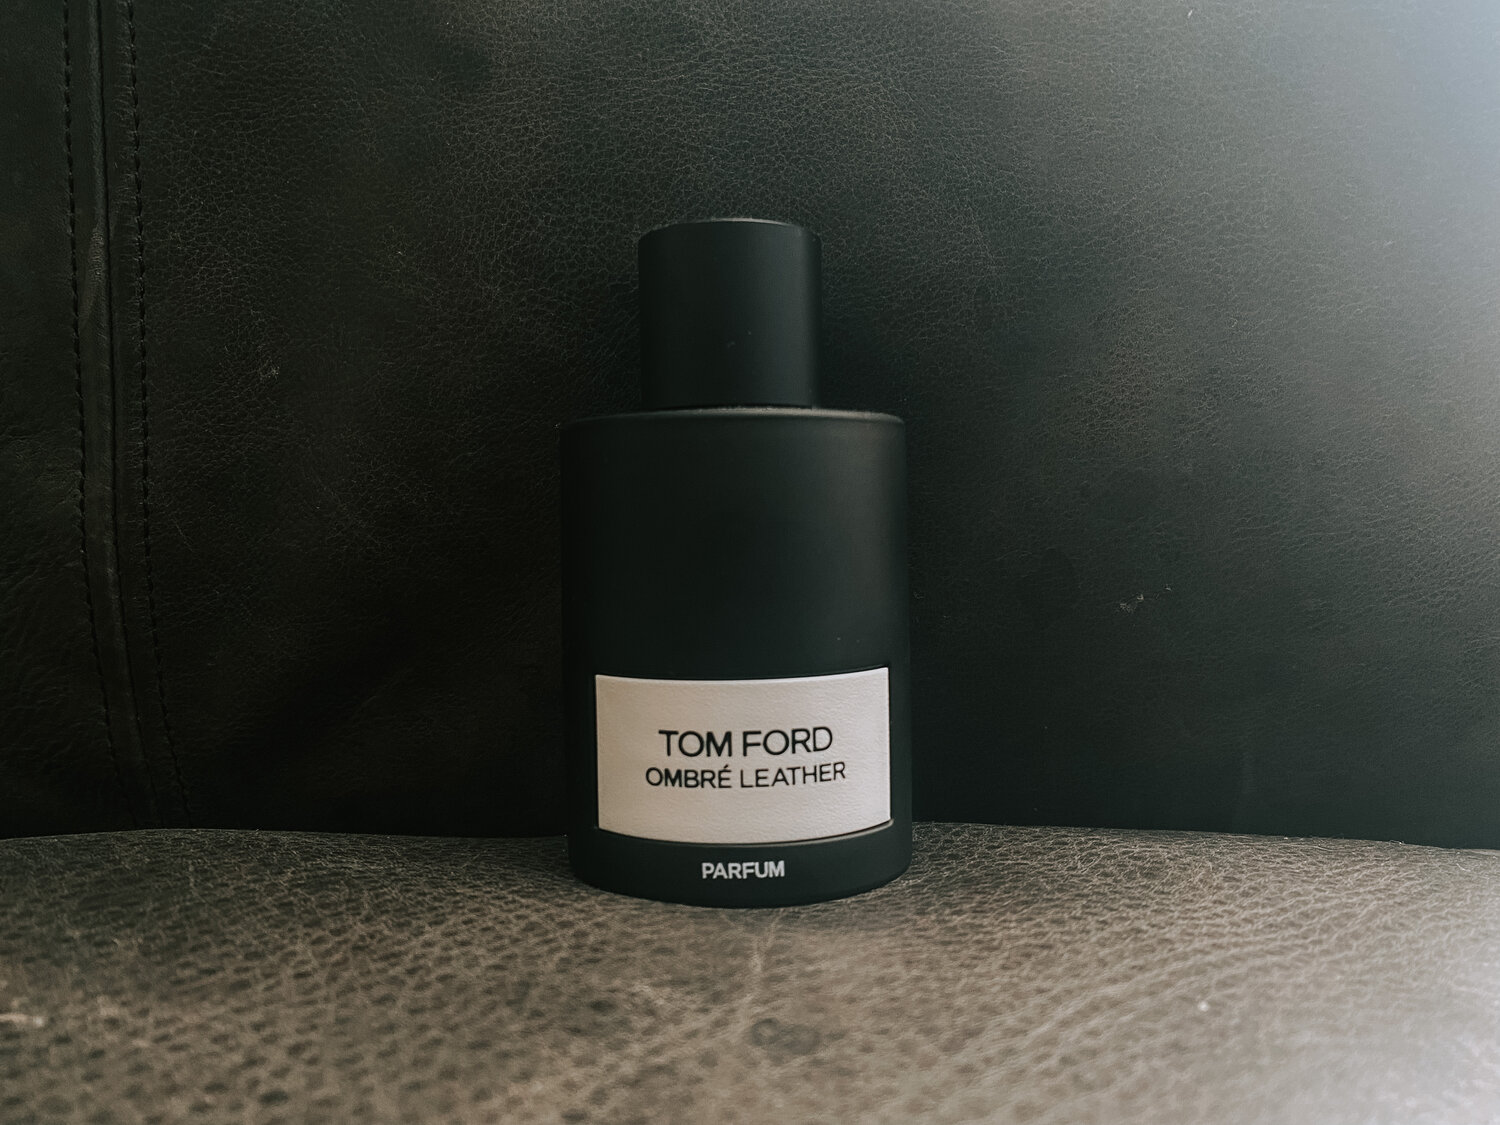 TOM FORD RELEASE OMBRE LEATHER PARFUM — MEN'S STYLE BLOG